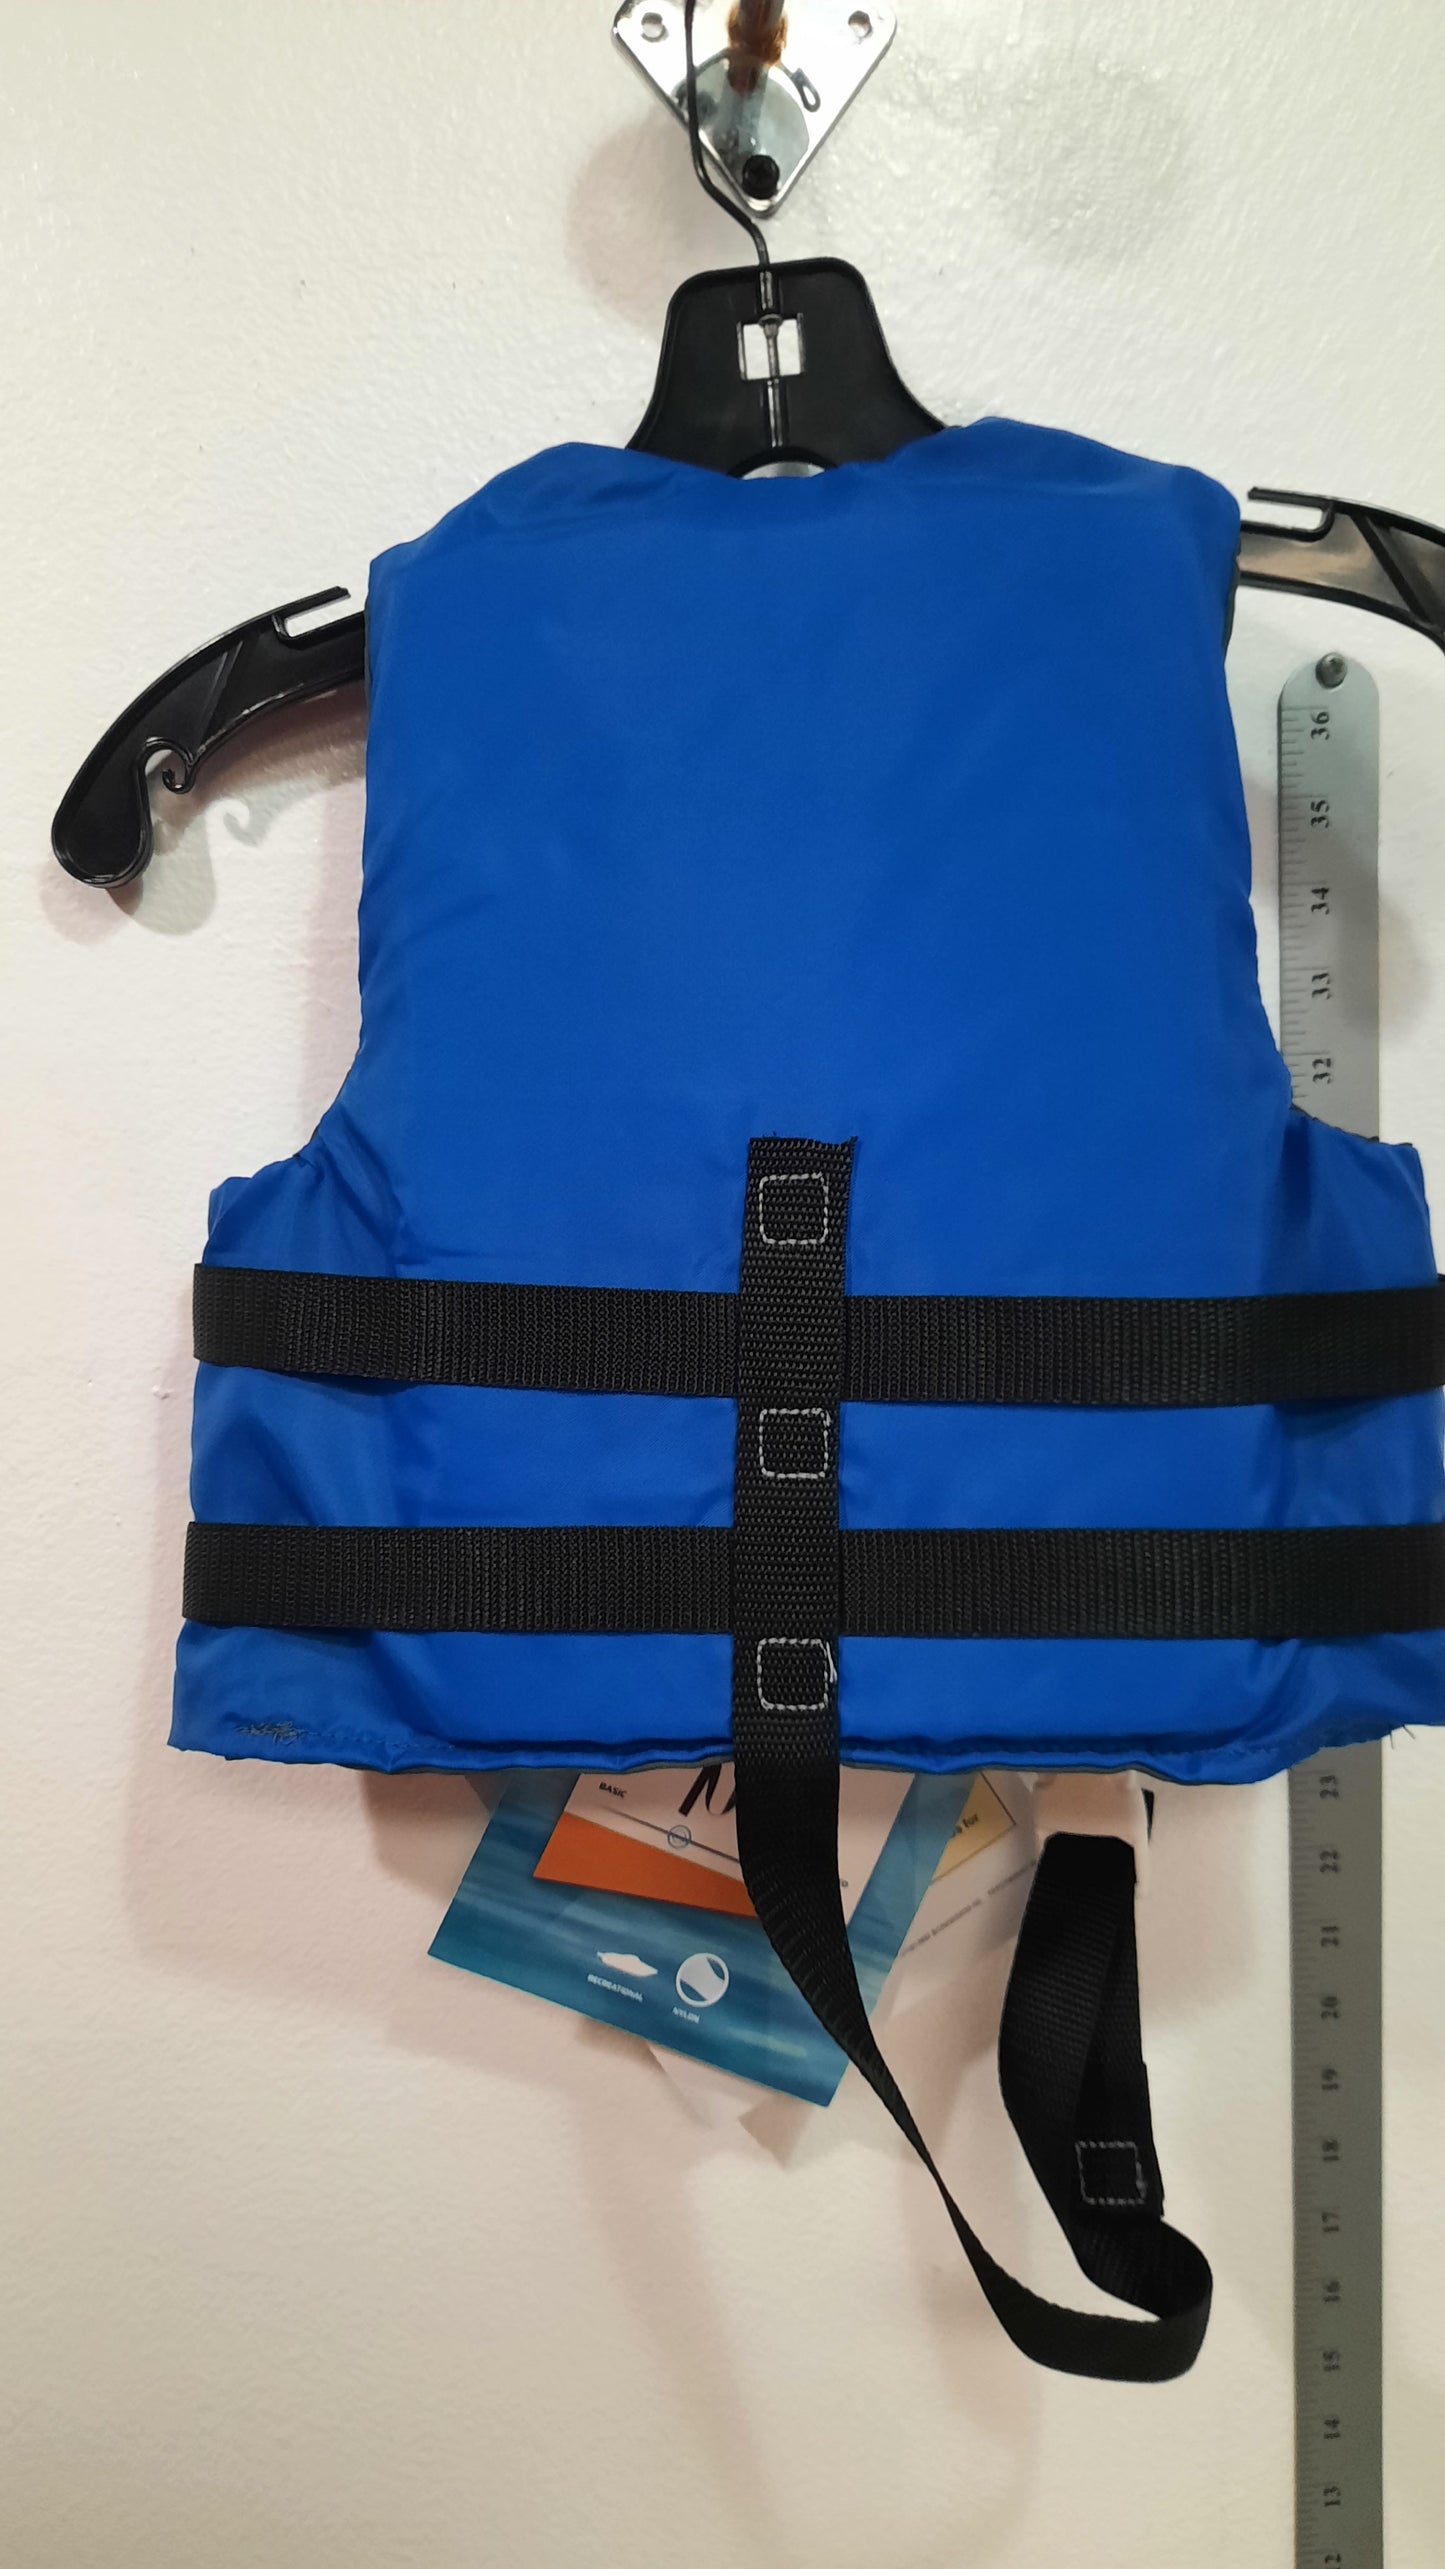 Stearns Life Vest PFD Type III Size Child 30-50 lbs Blue New